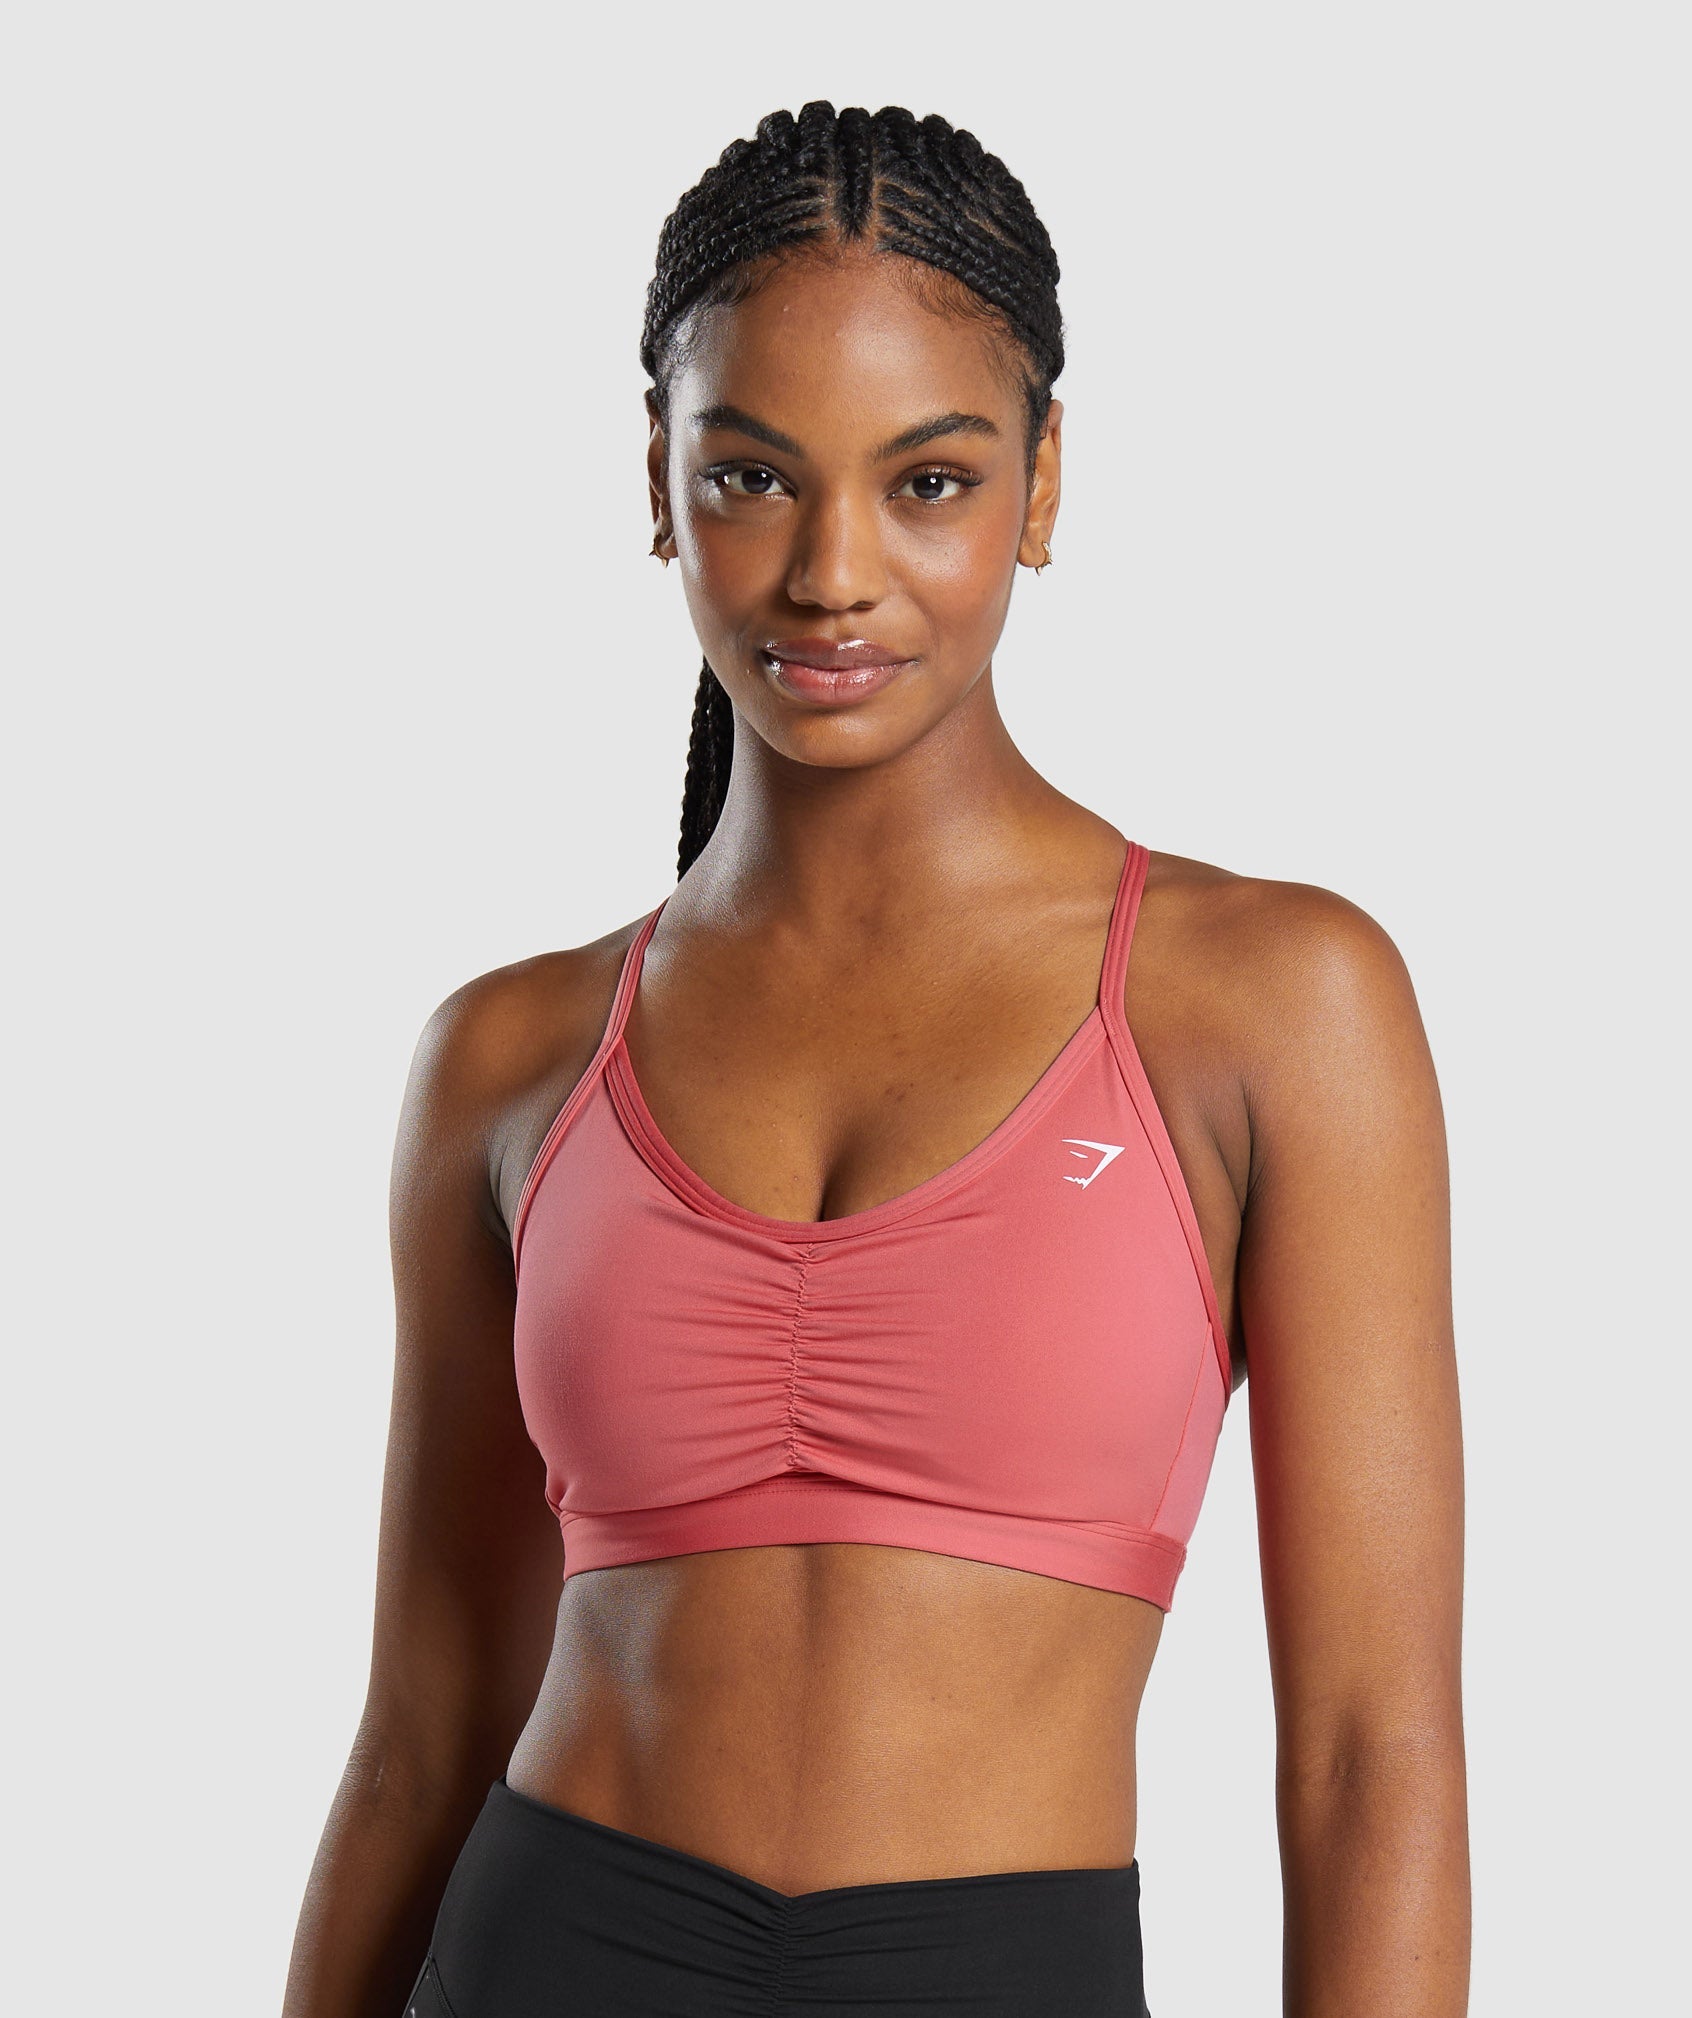 Ruched Sports Bra in Sunbaked Pink